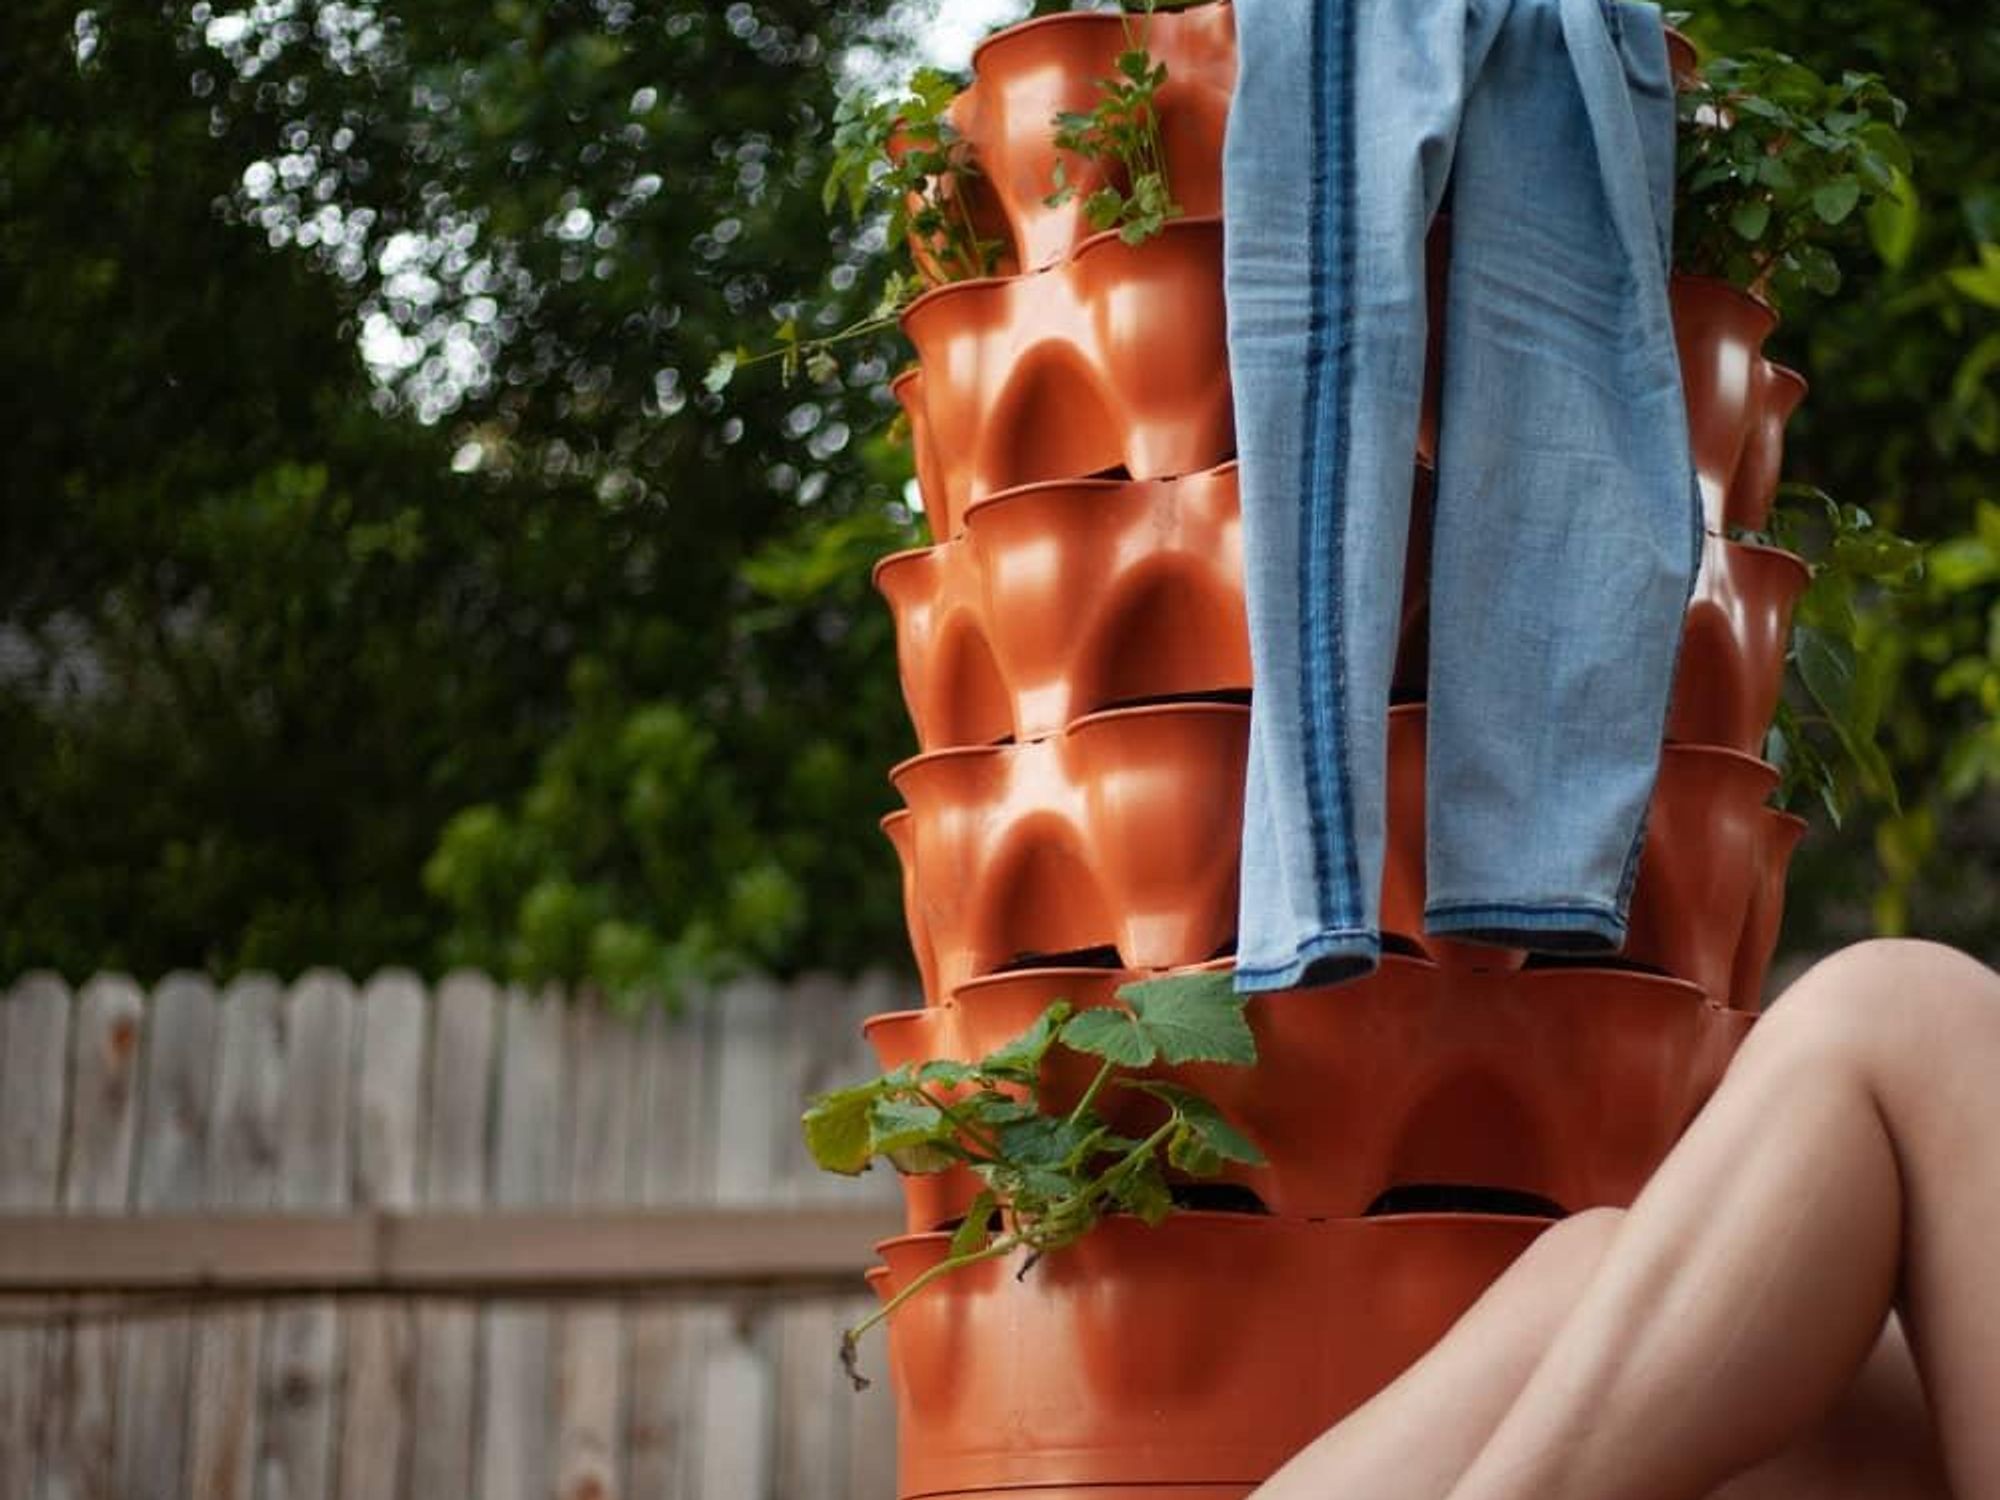 A pair of jeans is hung on a Garden Tower planter, with bare legs in the corner.